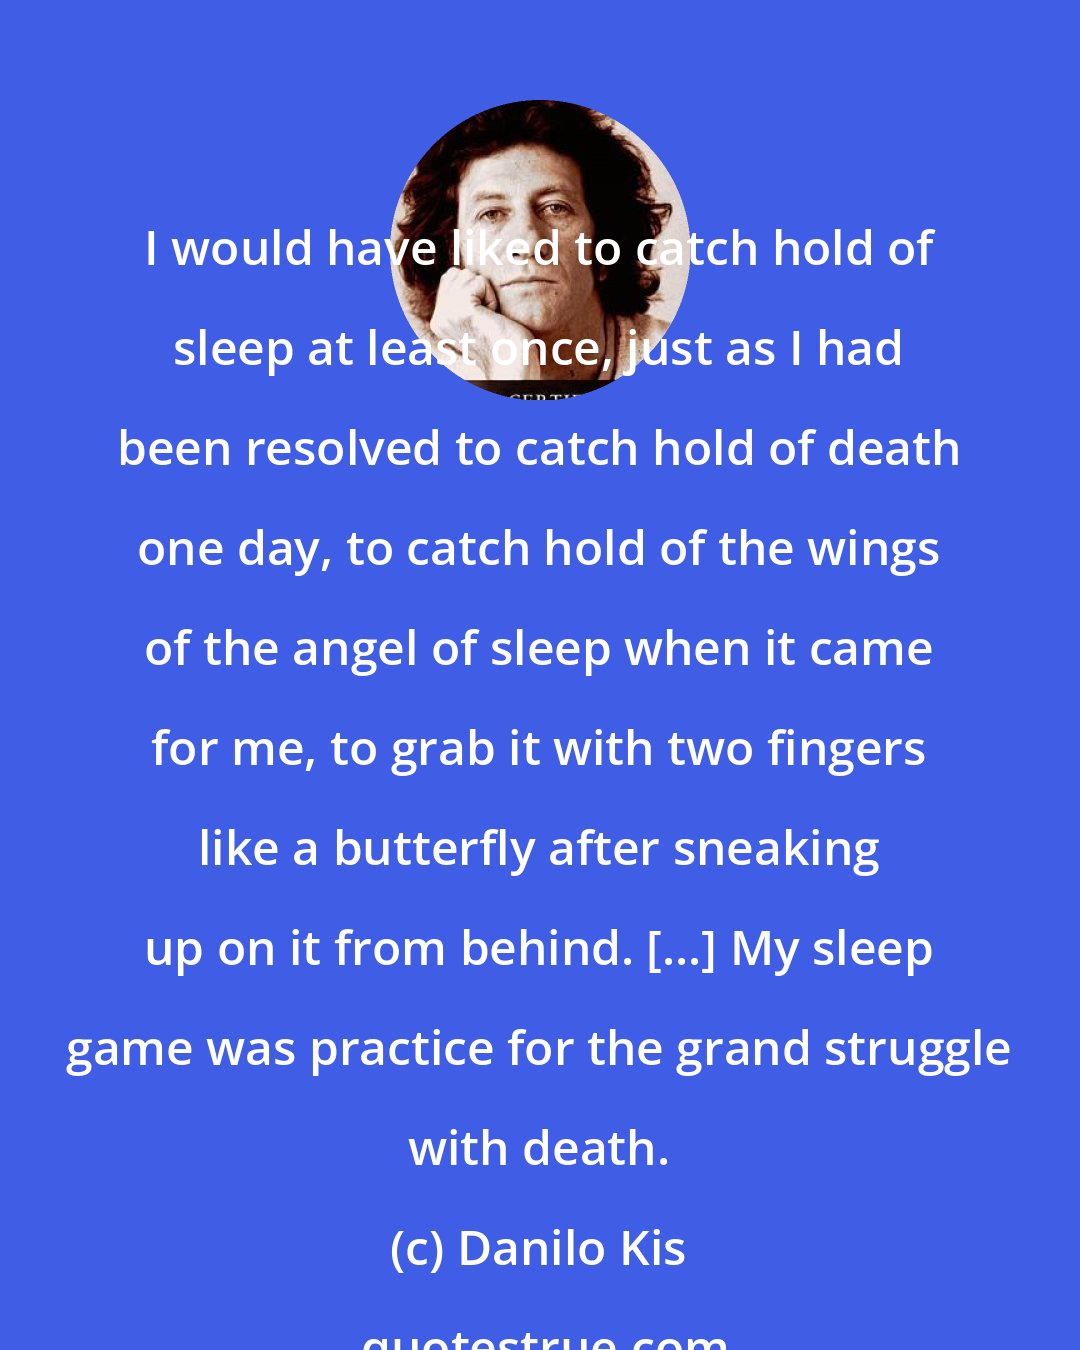 Danilo Kis: I would have liked to catch hold of sleep at least once, just as I had been resolved to catch hold of death one day, to catch hold of the wings of the angel of sleep when it came for me, to grab it with two fingers like a butterfly after sneaking up on it from behind. [...] My sleep game was practice for the grand struggle with death.